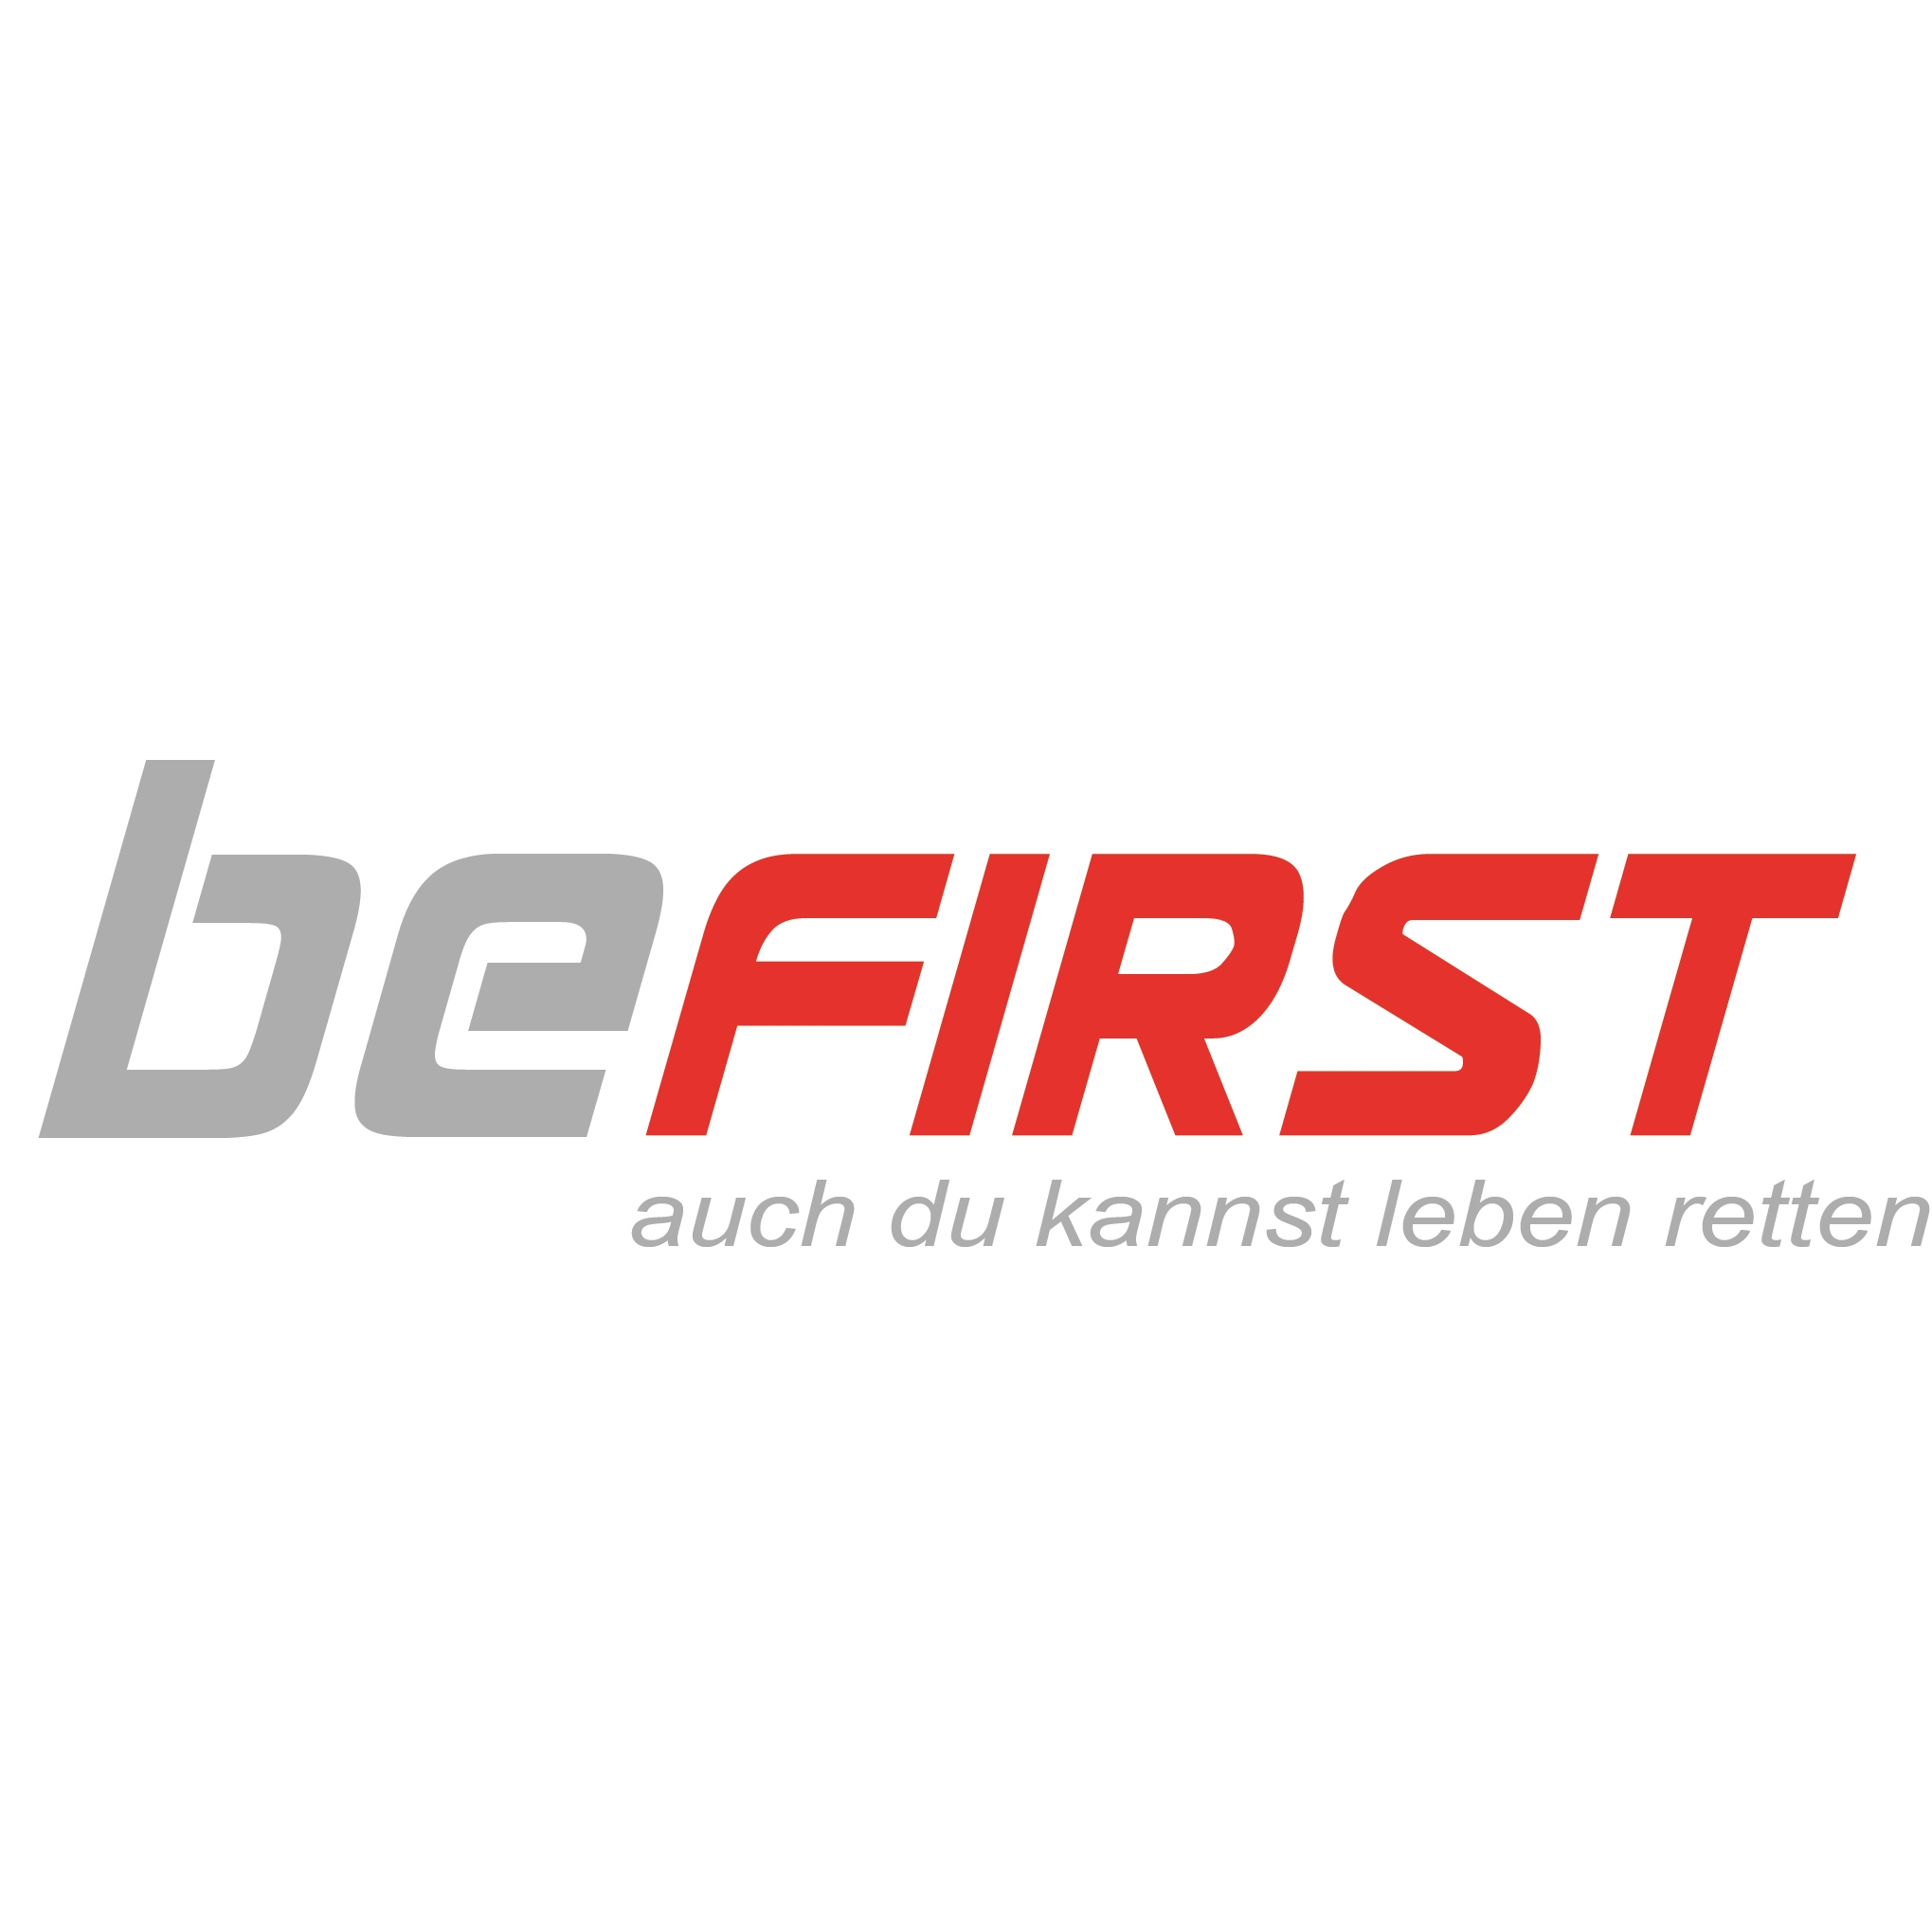 Be first